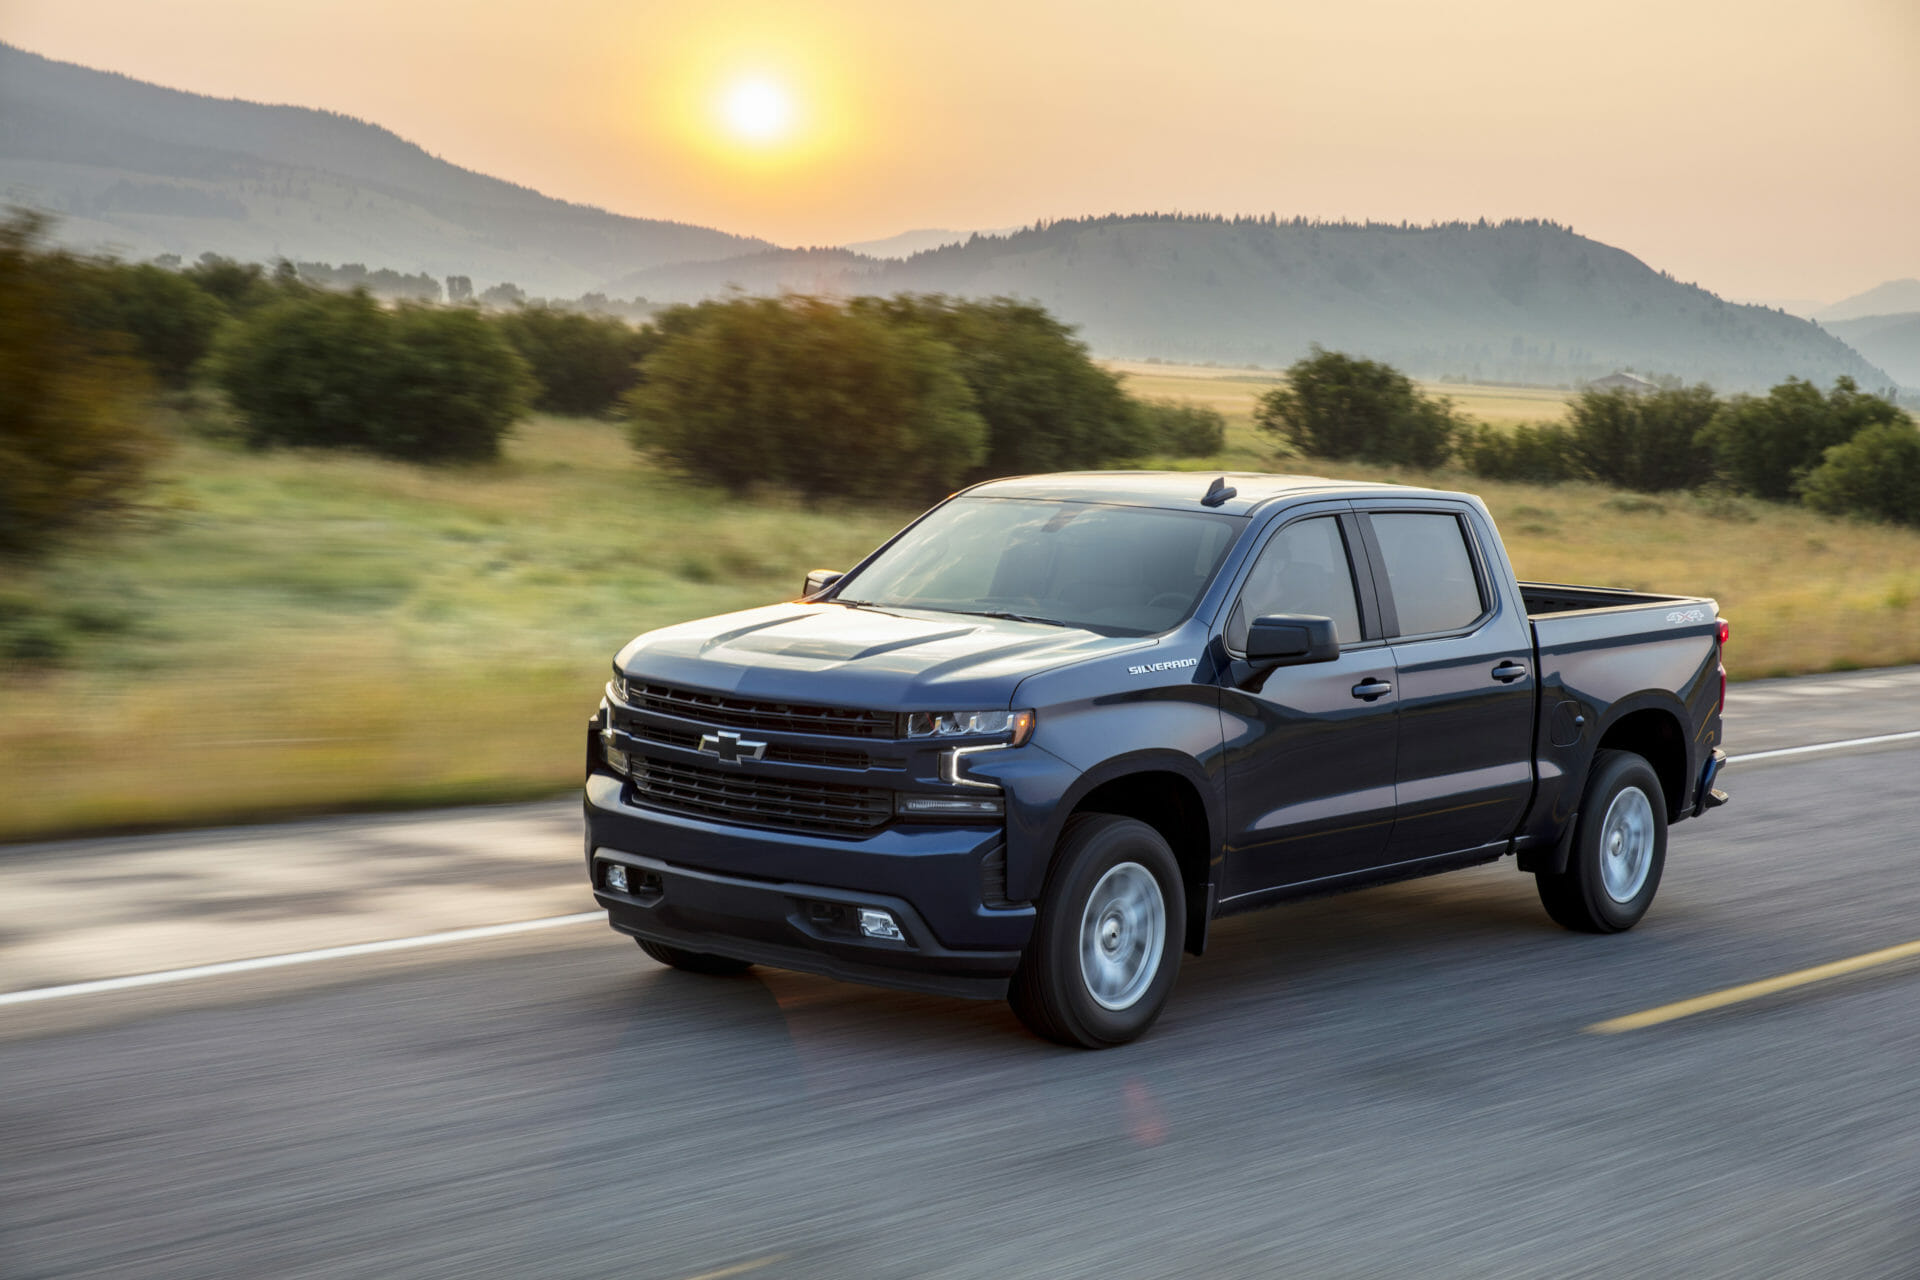 Chevrolet Silverado Worst Years and Years to Avoid